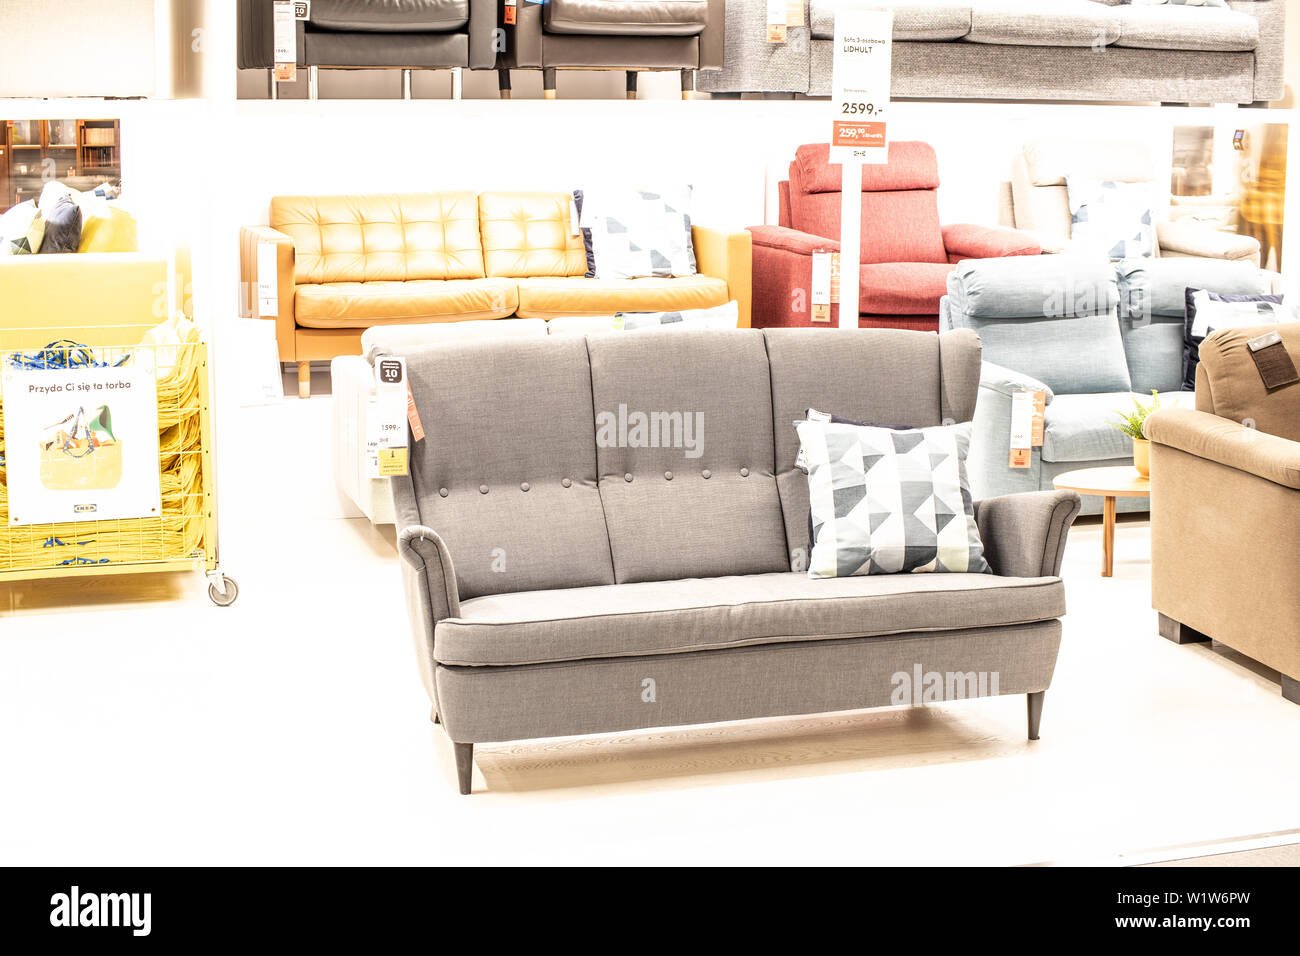 Lodz, Poland, Jan 2019 exhibition interior IKEA store Modern Chairs Armchairs Sofas IKEA sells ready-to-assemble furniture appliances home accessories Stock Photo